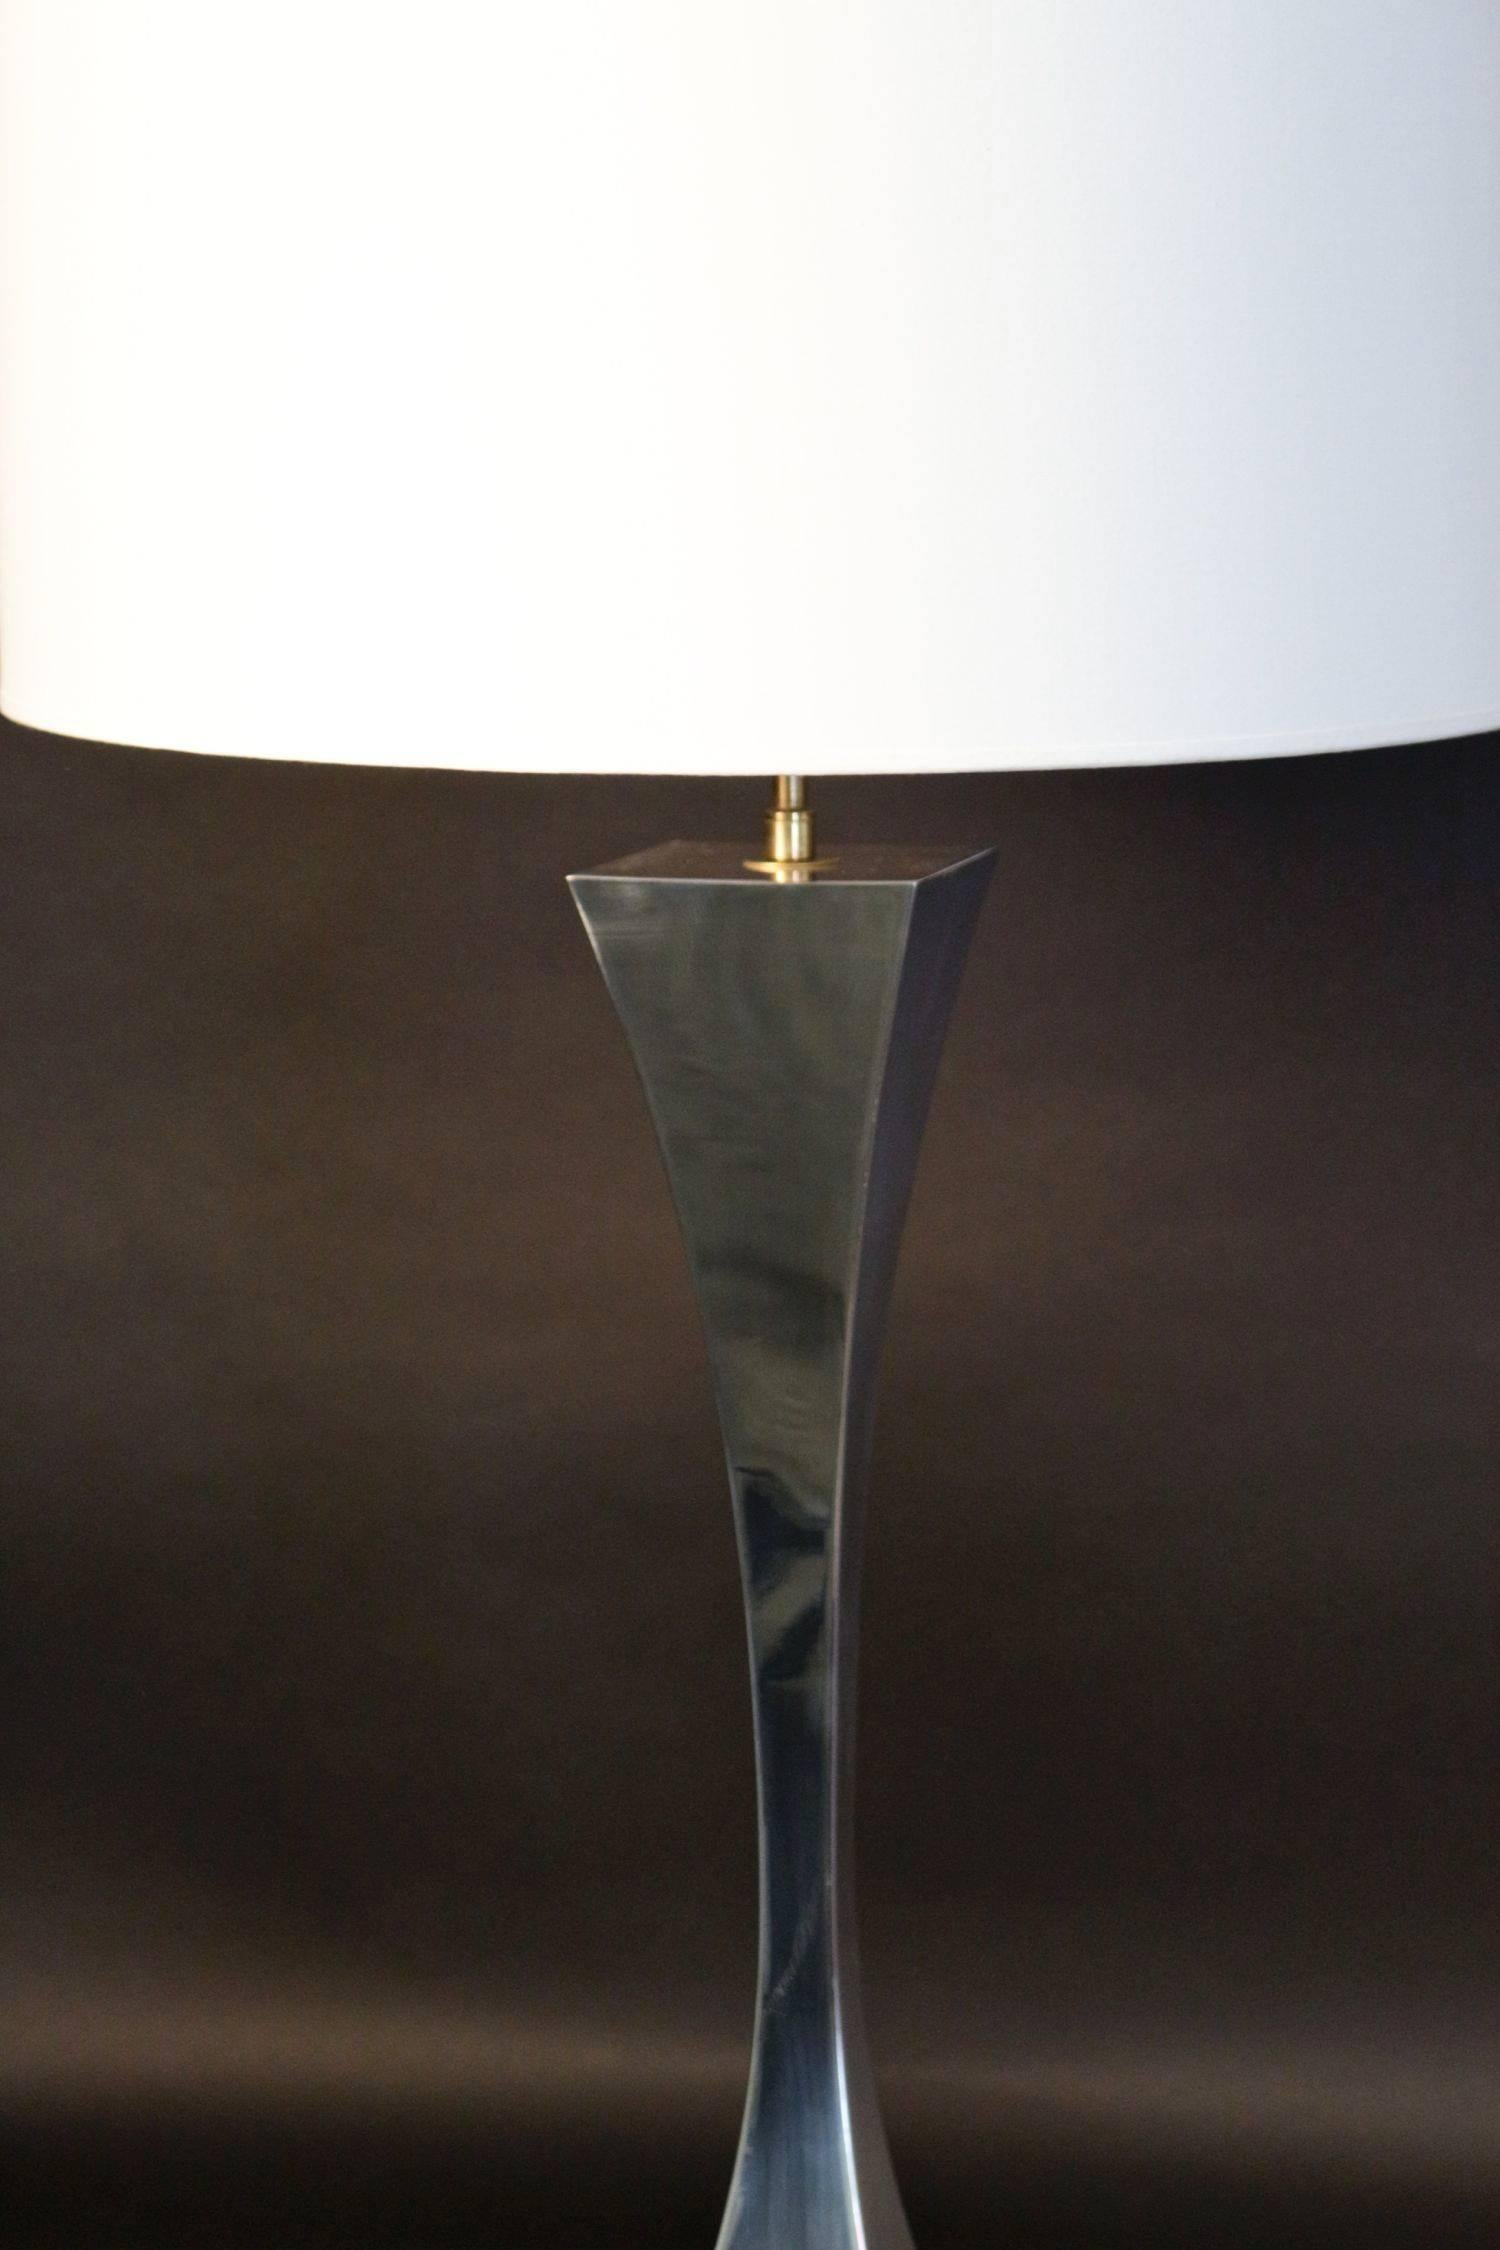 Large 1970s pyramidal table lamp by A. Montagna Grillo.
The diabolo shape trunk with a square base is in silver metal.
Editor: High society arredamenti Milano.
New off-white lampshade redone according to the original.